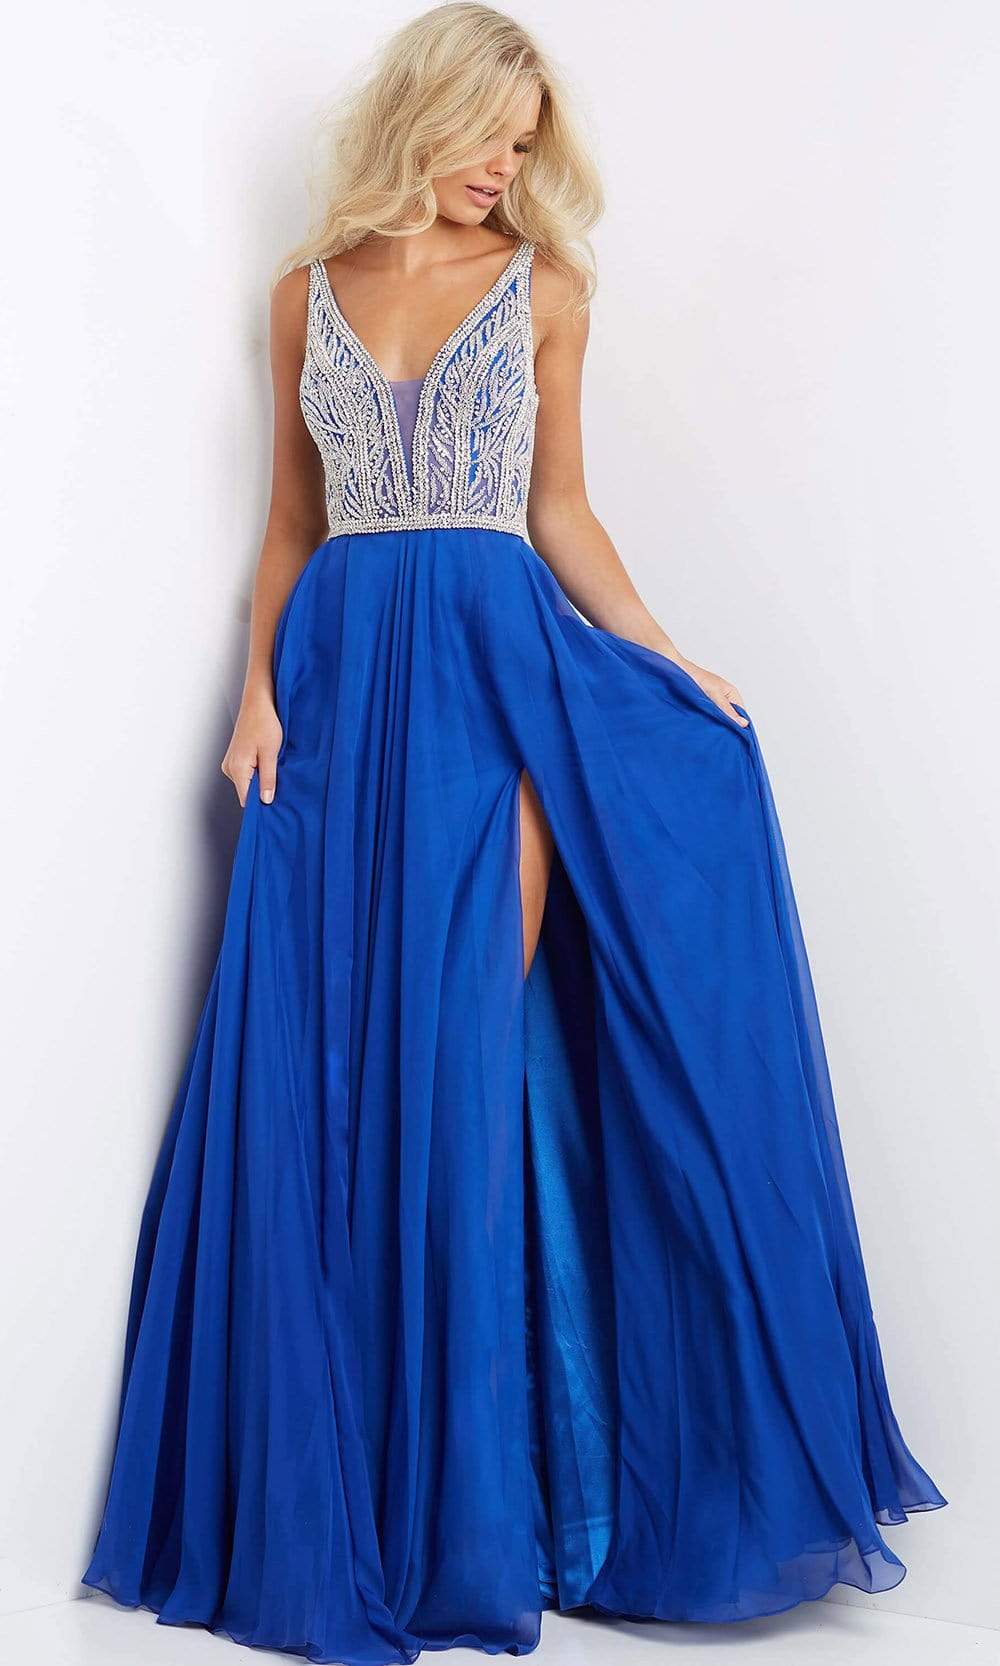 Jovani - 07136 Jeweled Bodice High Slit Gown Special Occasion Dress 00 / Royal